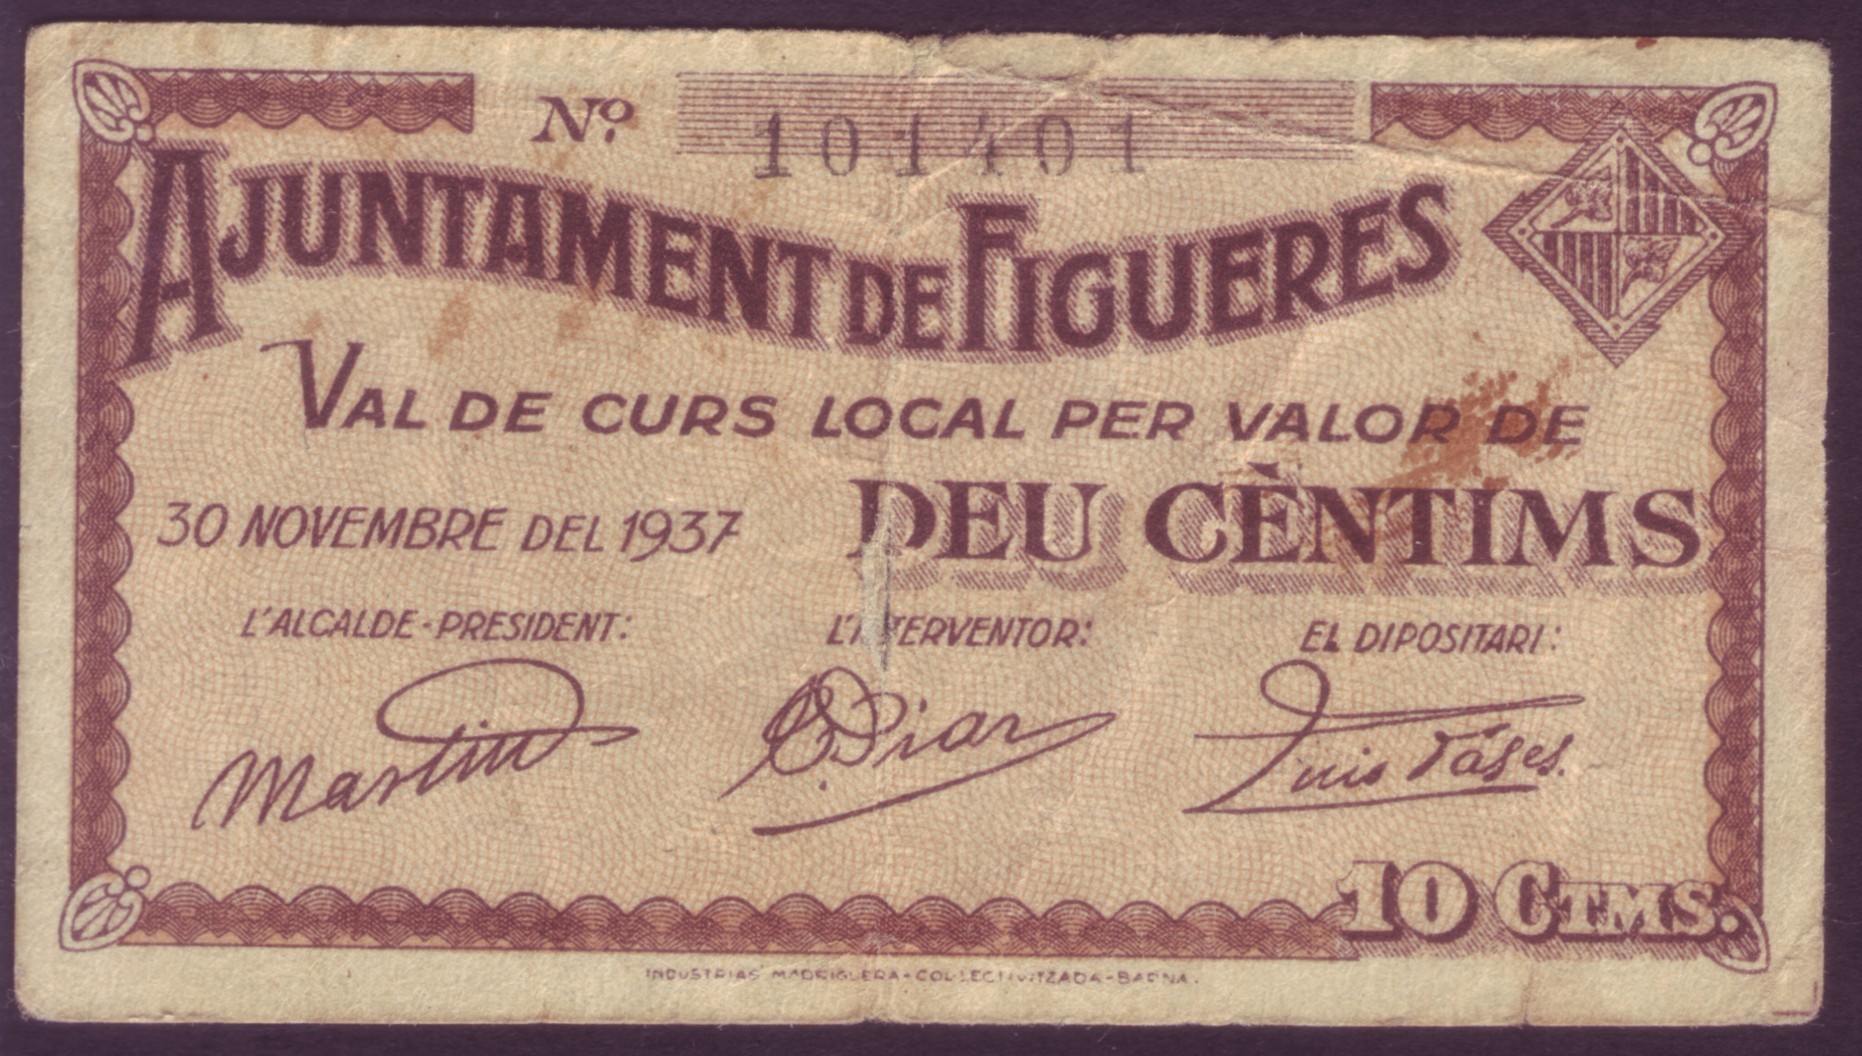 BANKNOTE - FIGUERES (CATALONIA) - 10 CTS. YEAR 1937 -          BILL0006a_FIGUERES